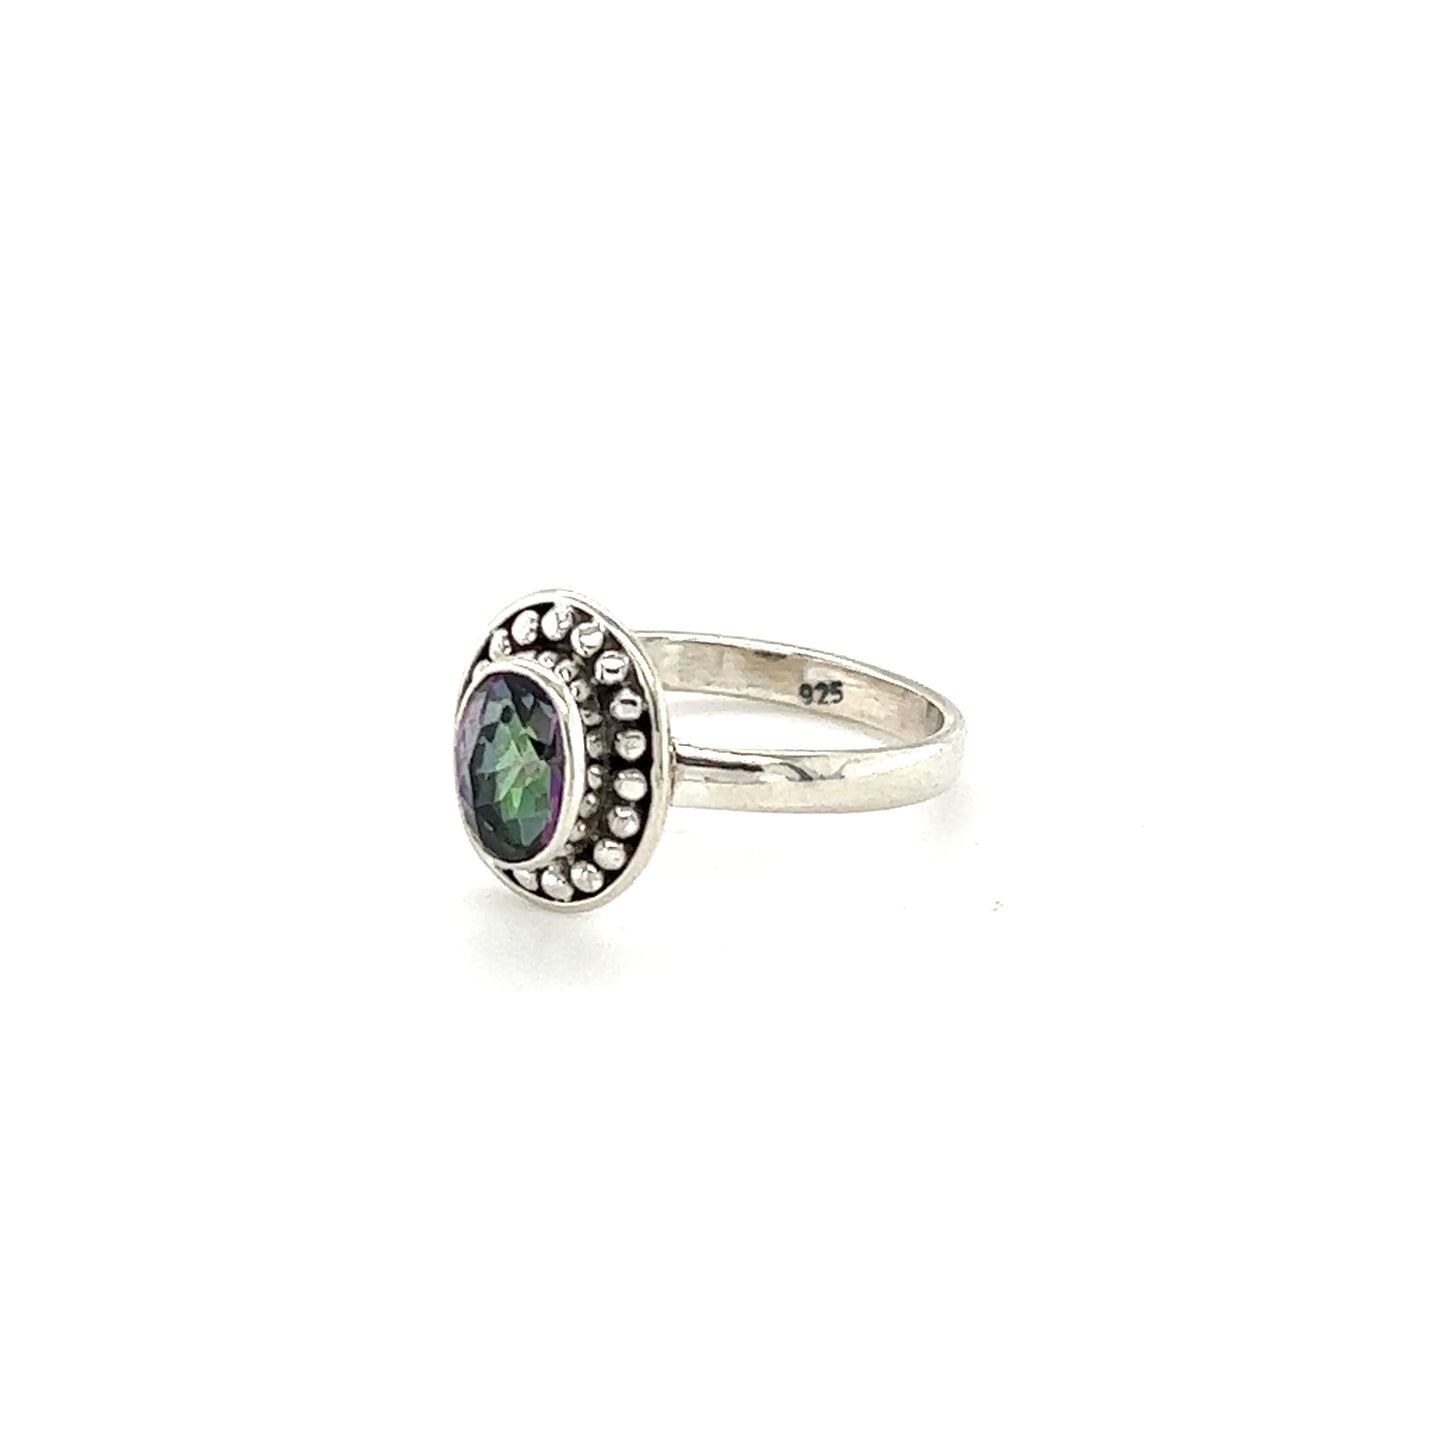 A sterling silver Oval Gemstone Ring with Ball Disk Border, perfect for the bohemian hippie in Santa Cruz.